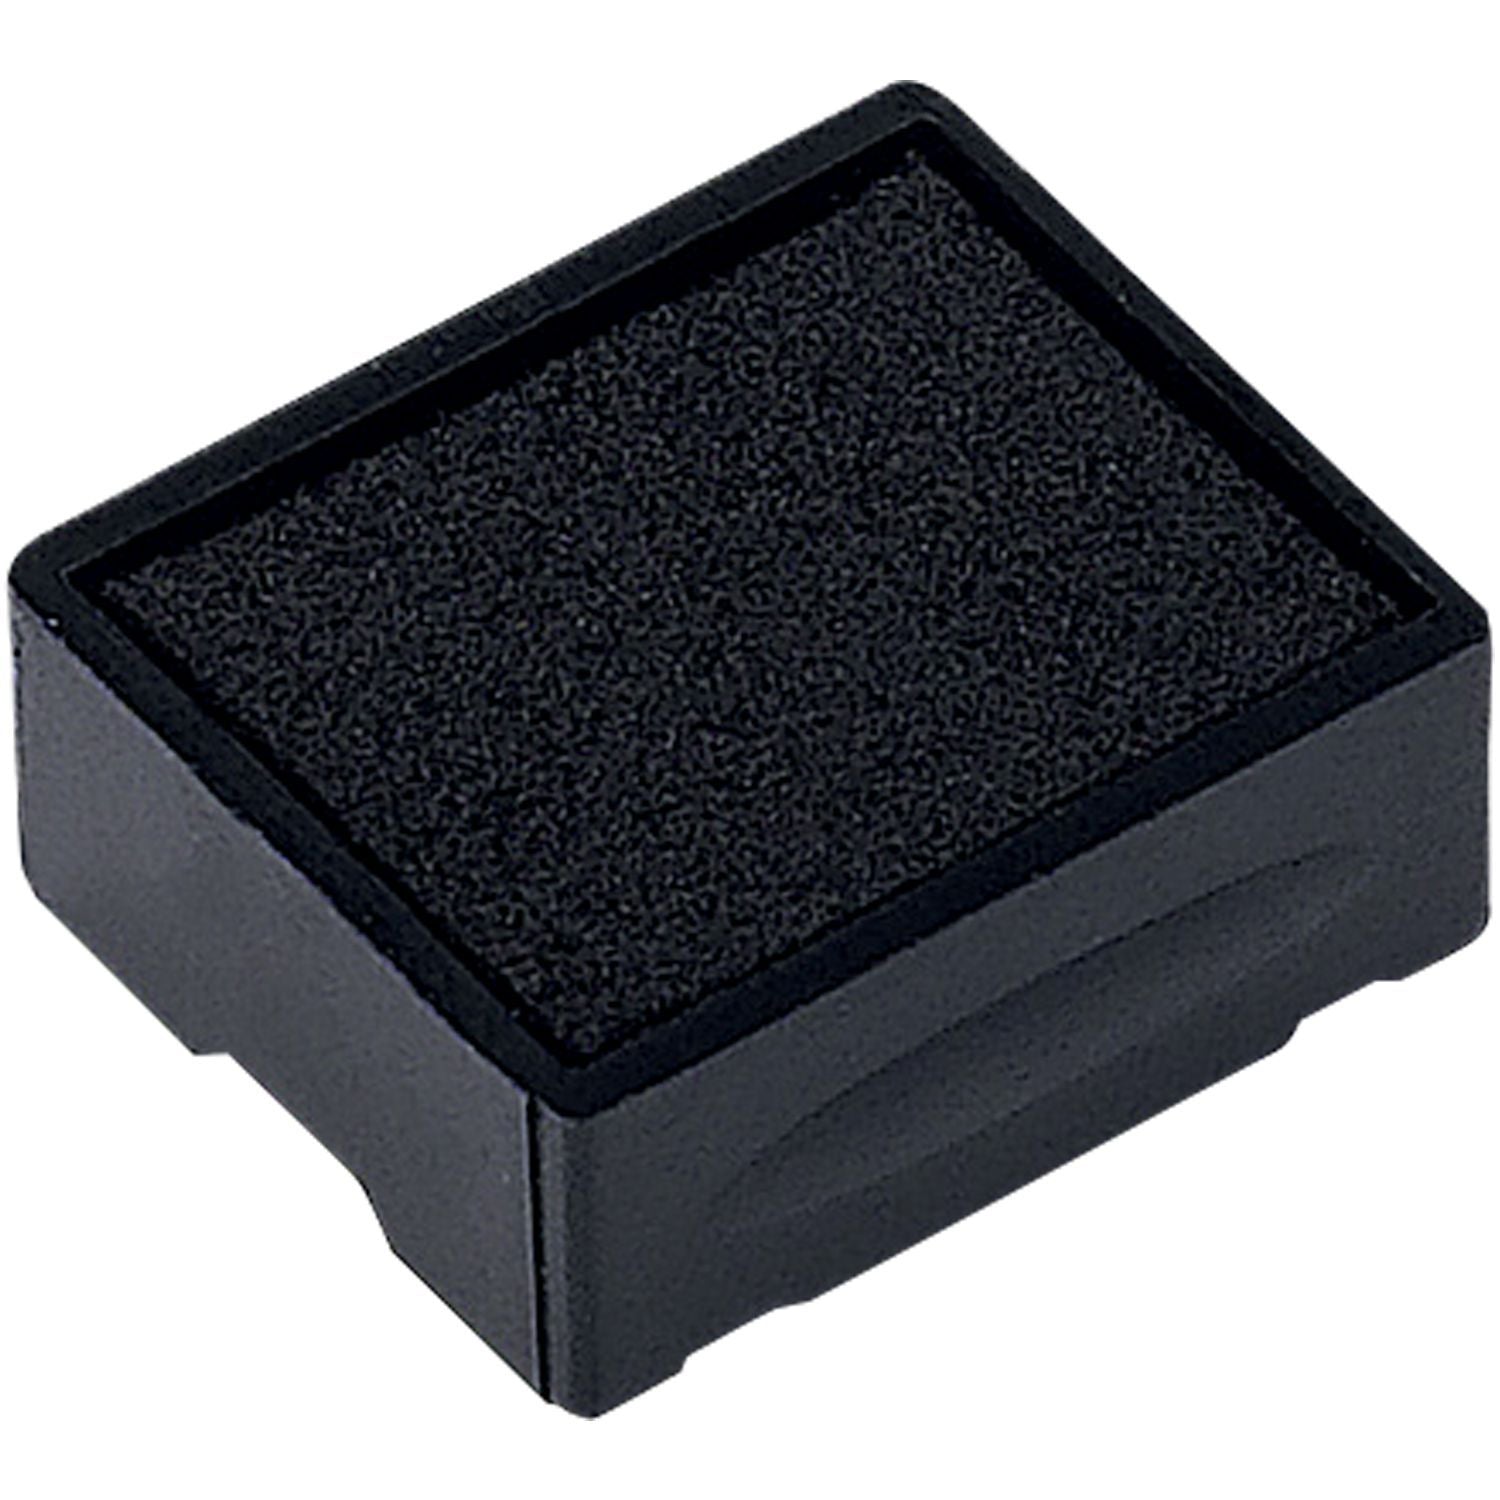 One Color Replacement Ink Pad For 4908 Trodat Black